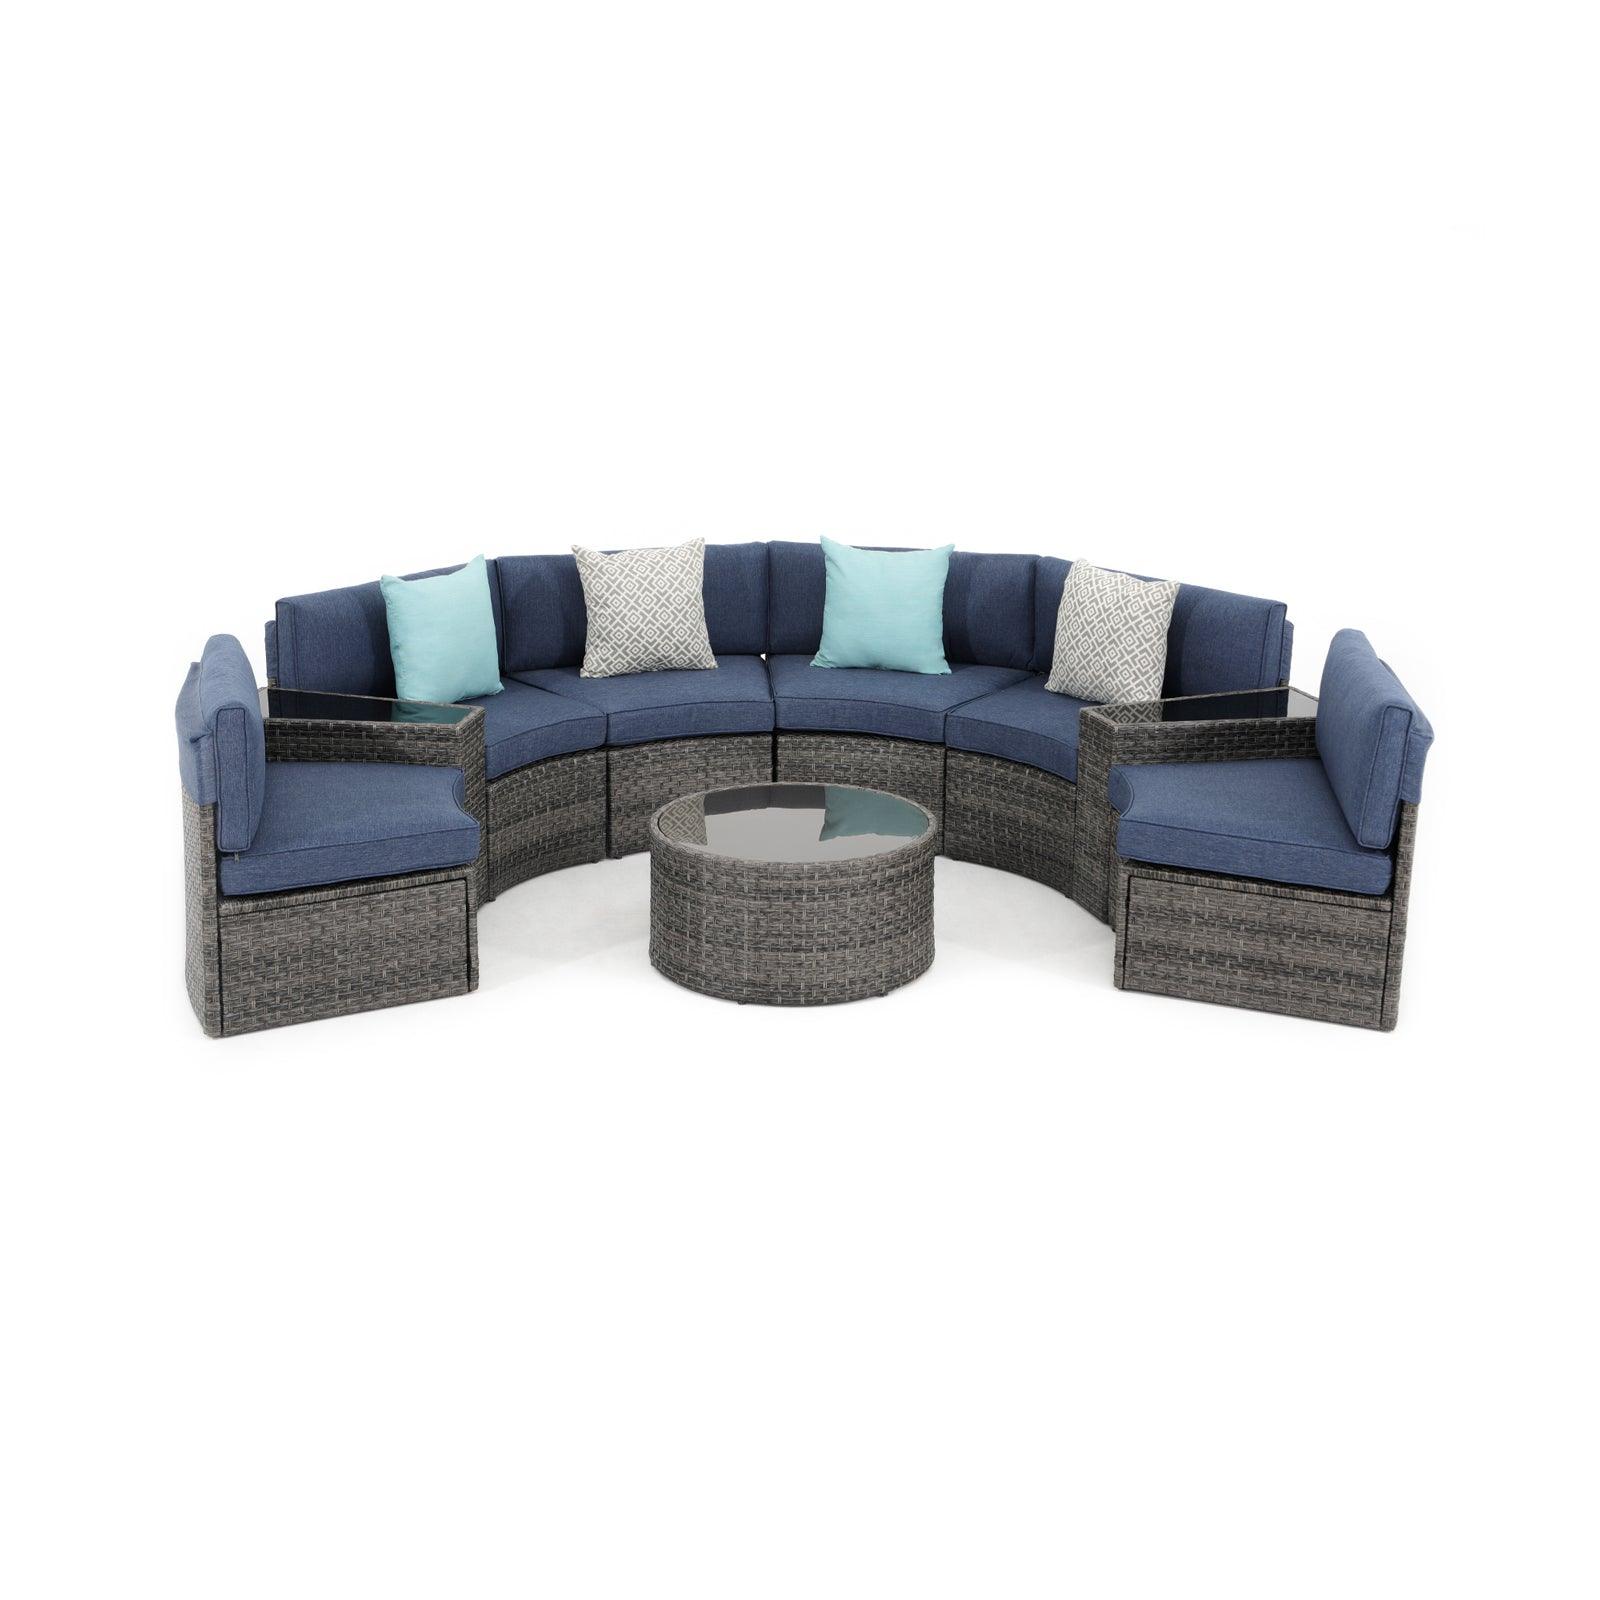 Boboli 9-piece Grey Wicker Curved Sectional Set with navy blue cushions, 1 Round Glass Table + 2 glass top side tables + 6 sectional sofas, front- Jardina Furniture #color_Navy Blue #piece_9-pc.